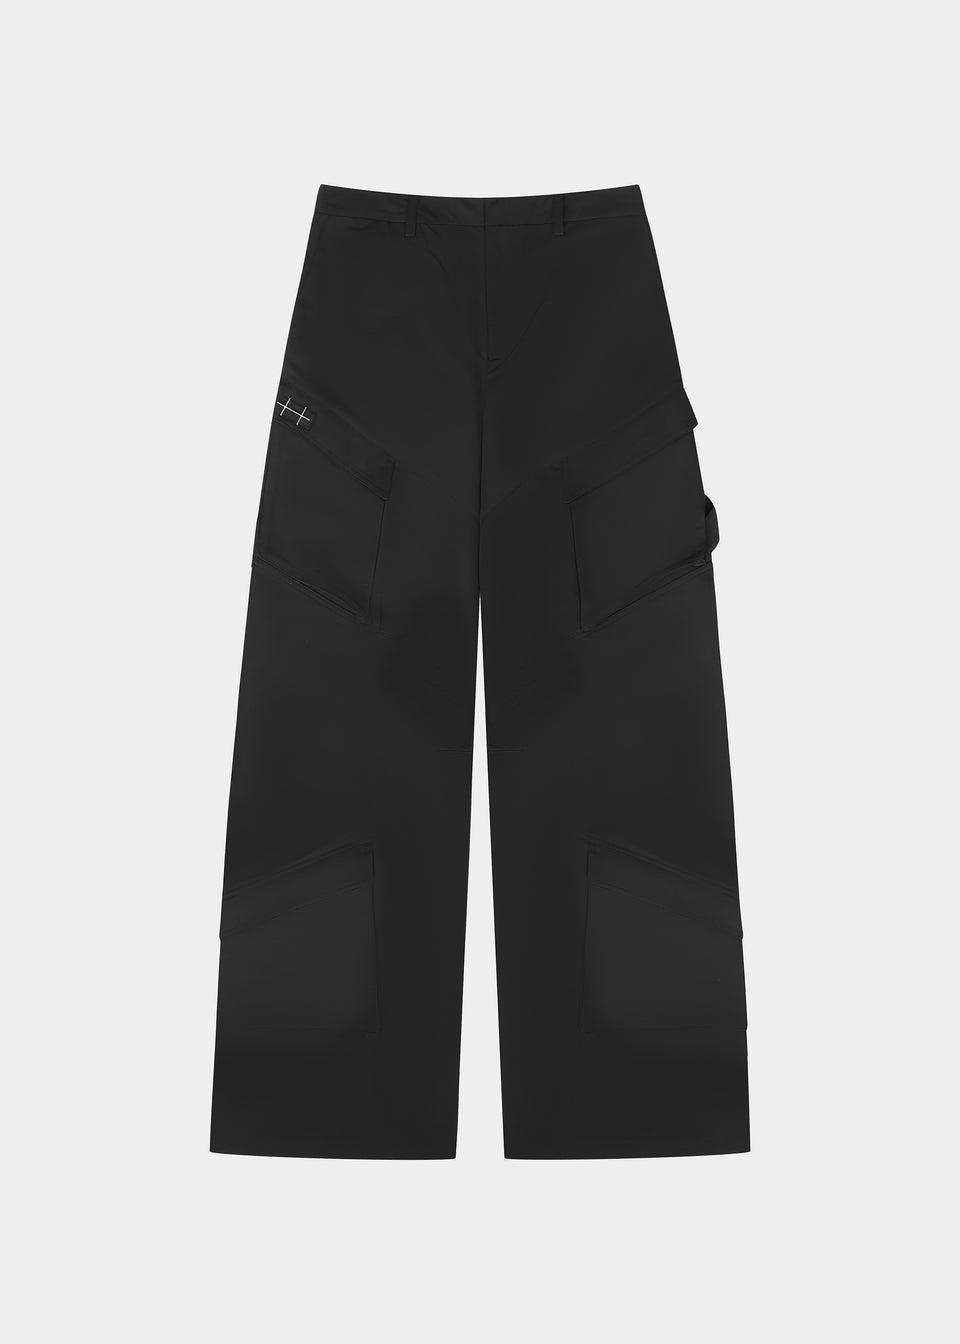 CELLULAE CARGO TROUSERS by HELIOT EMIL